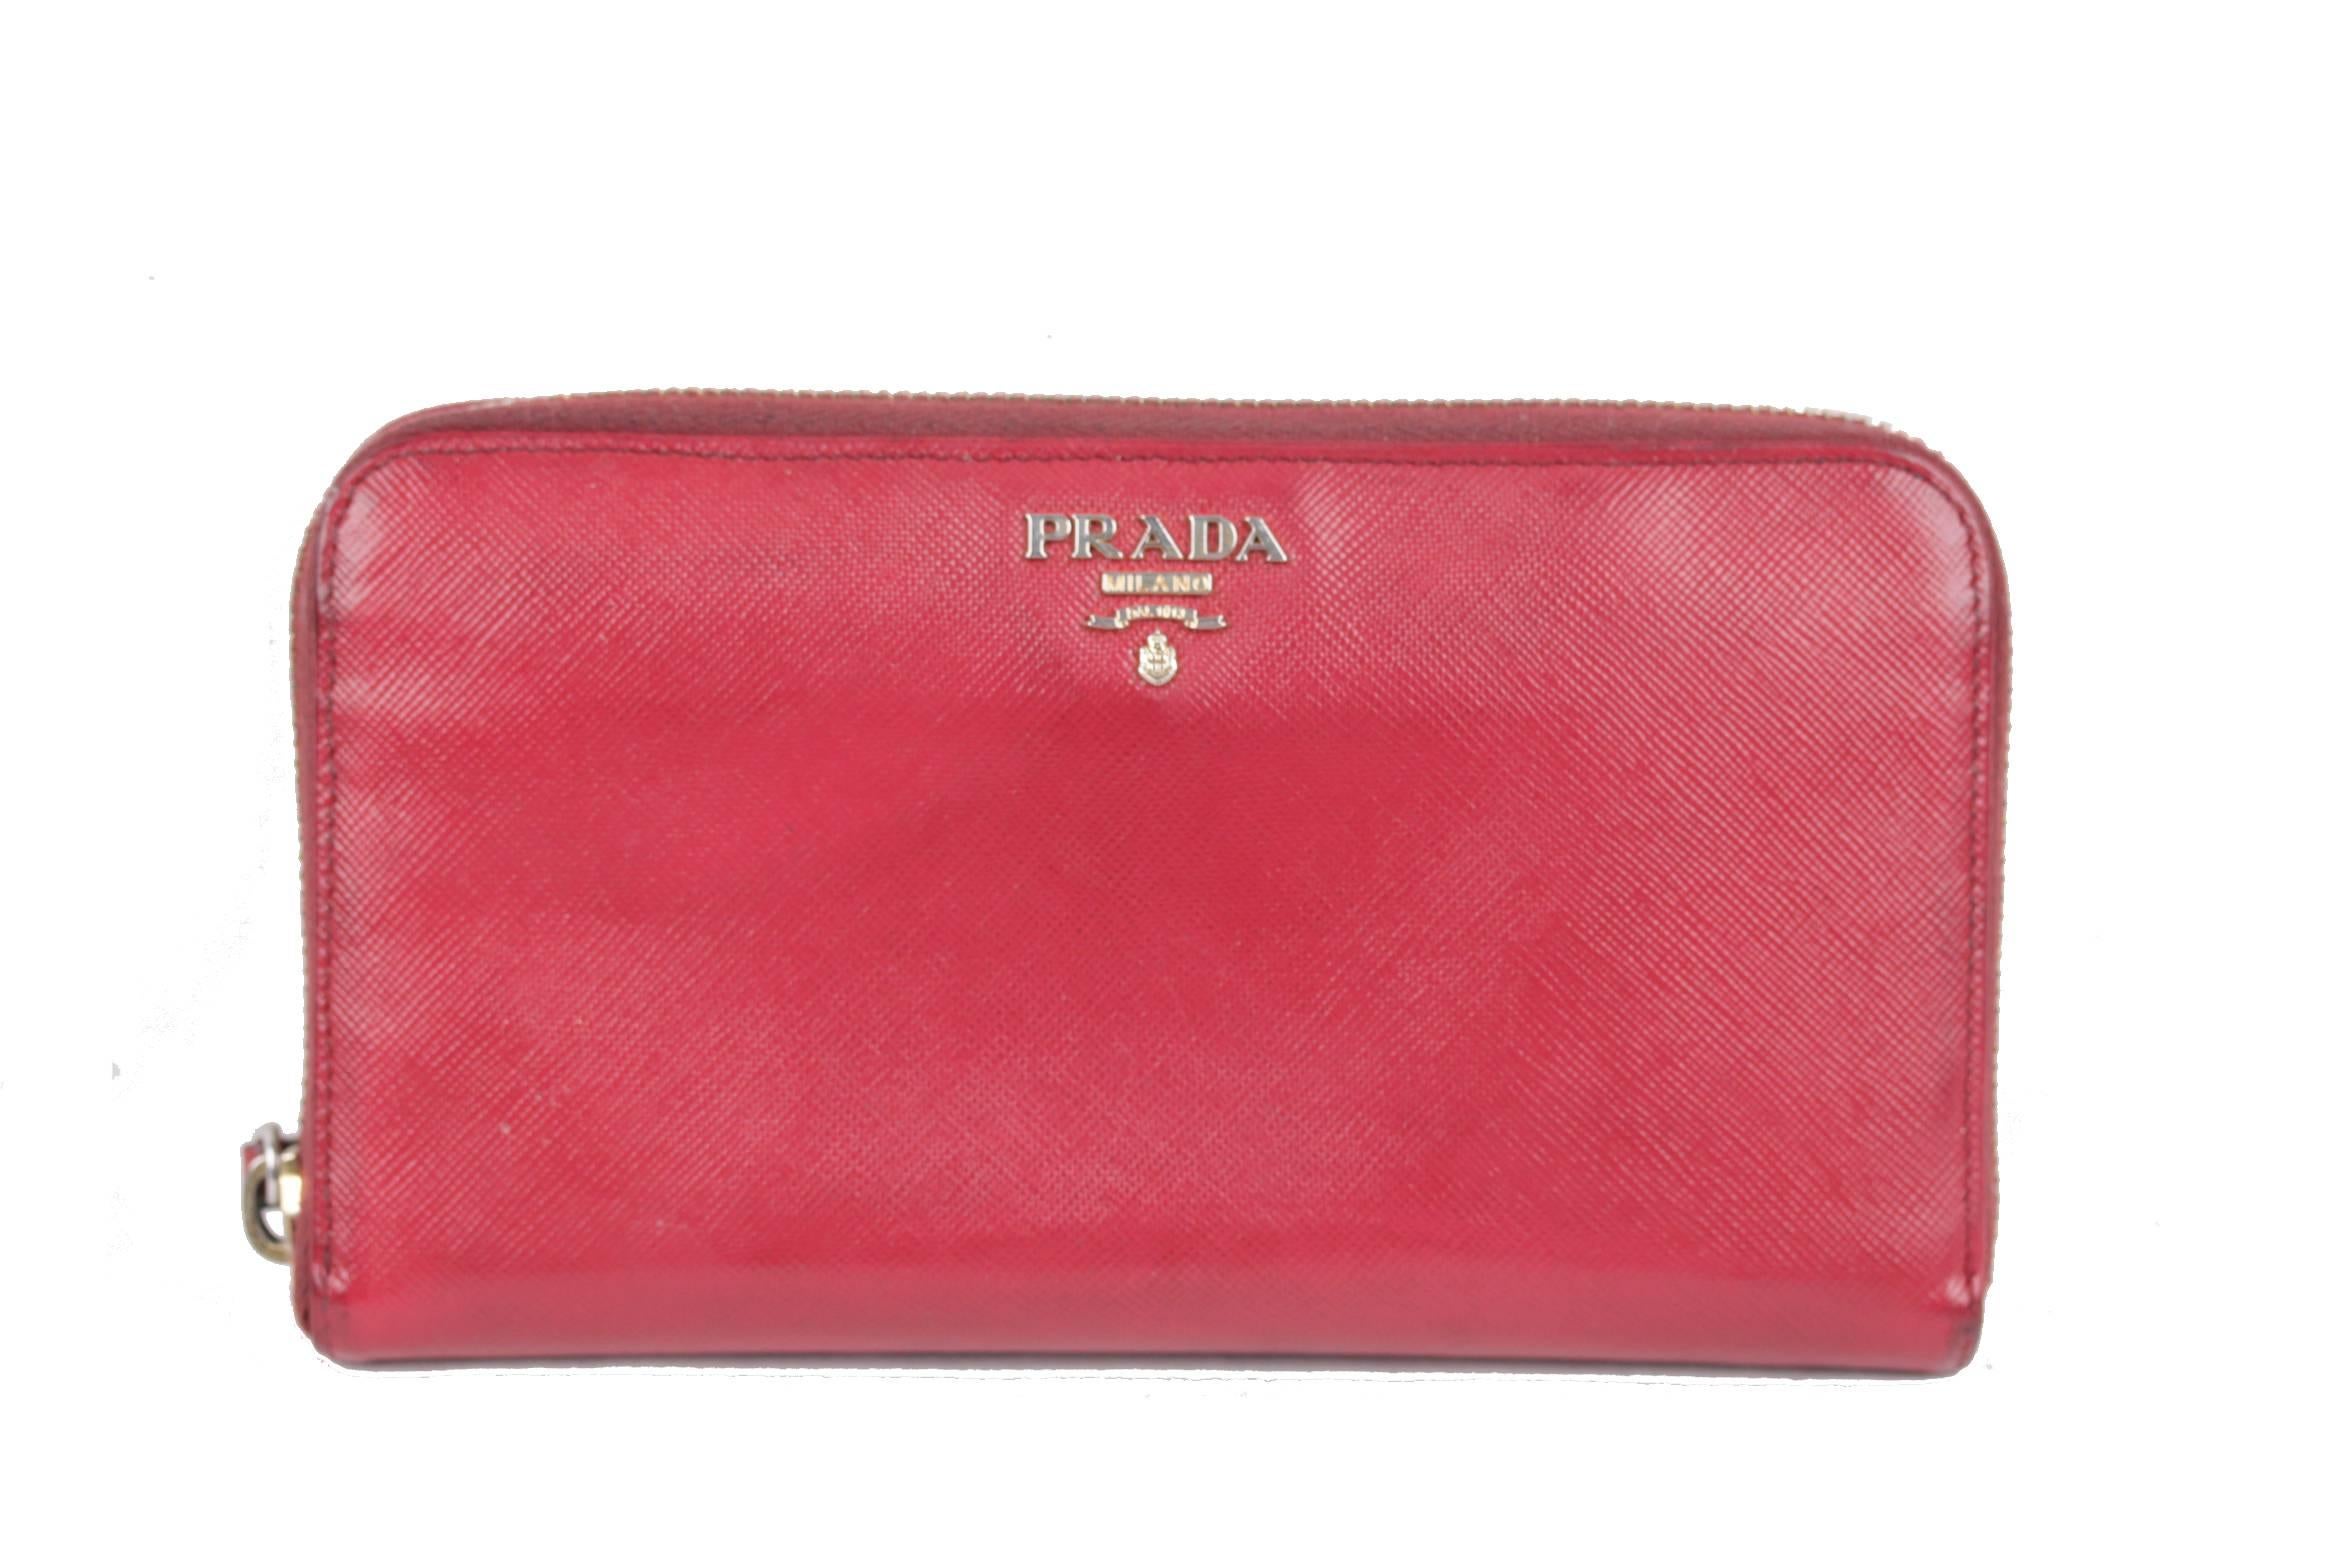  - Made of Red Saffiano Leather

- Gold metal Prada logo lettering

- Wrap-around zipper

- 8 credit card slots & 2 open pockets

- 2 bill compartments & 1 middle zip compartment for coins

- Leather & nylon lining

- Stores your credit cards,